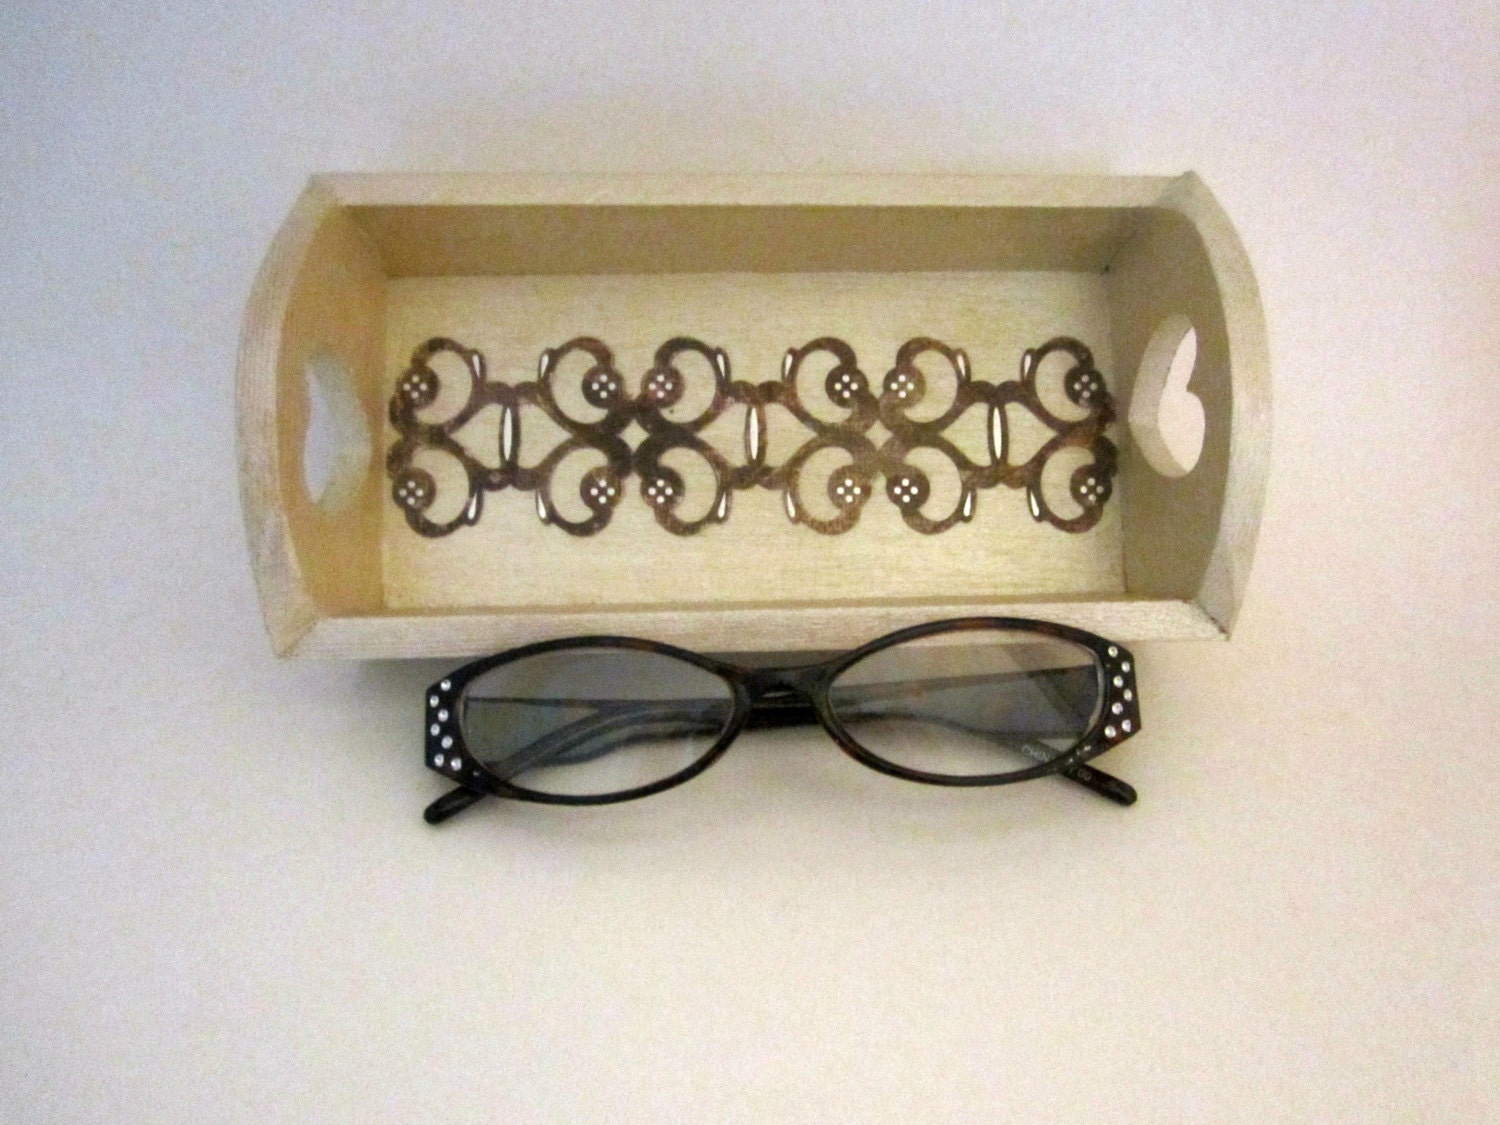 Eyeglasses Holder, Jewelry Tray, Ring Holder, Champagne Brown Silver, Wooden Tray, Desk Accessory - JustAddJewelry